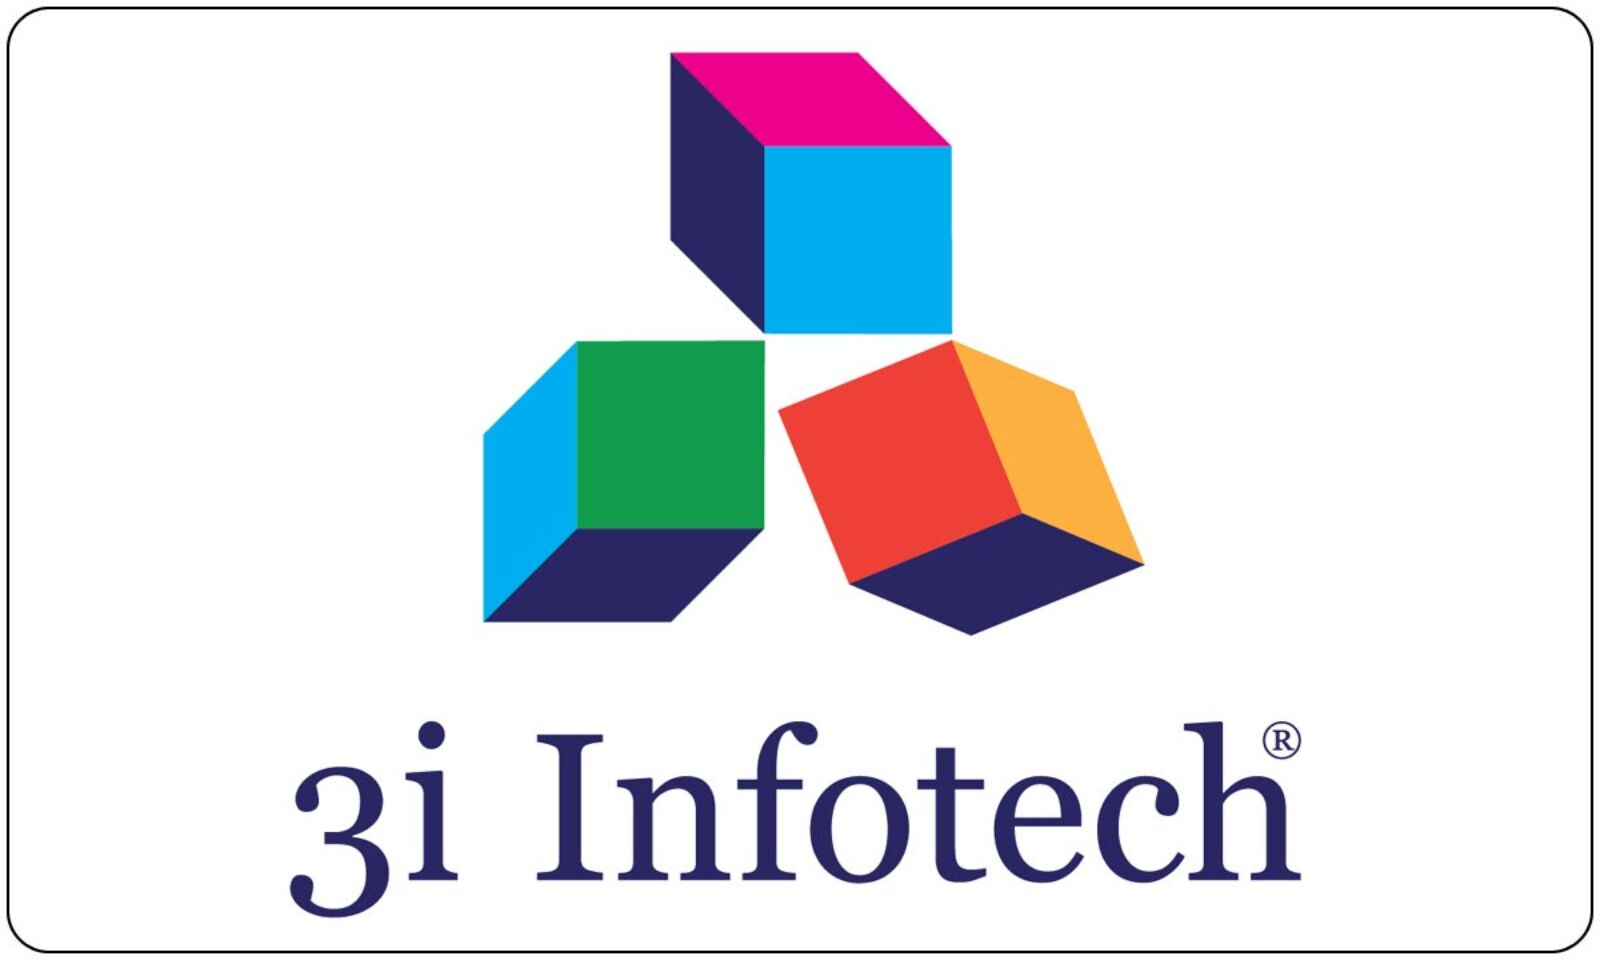 3i Infotech Shares Up 3% on Rs 39.55 Crore Contract Win